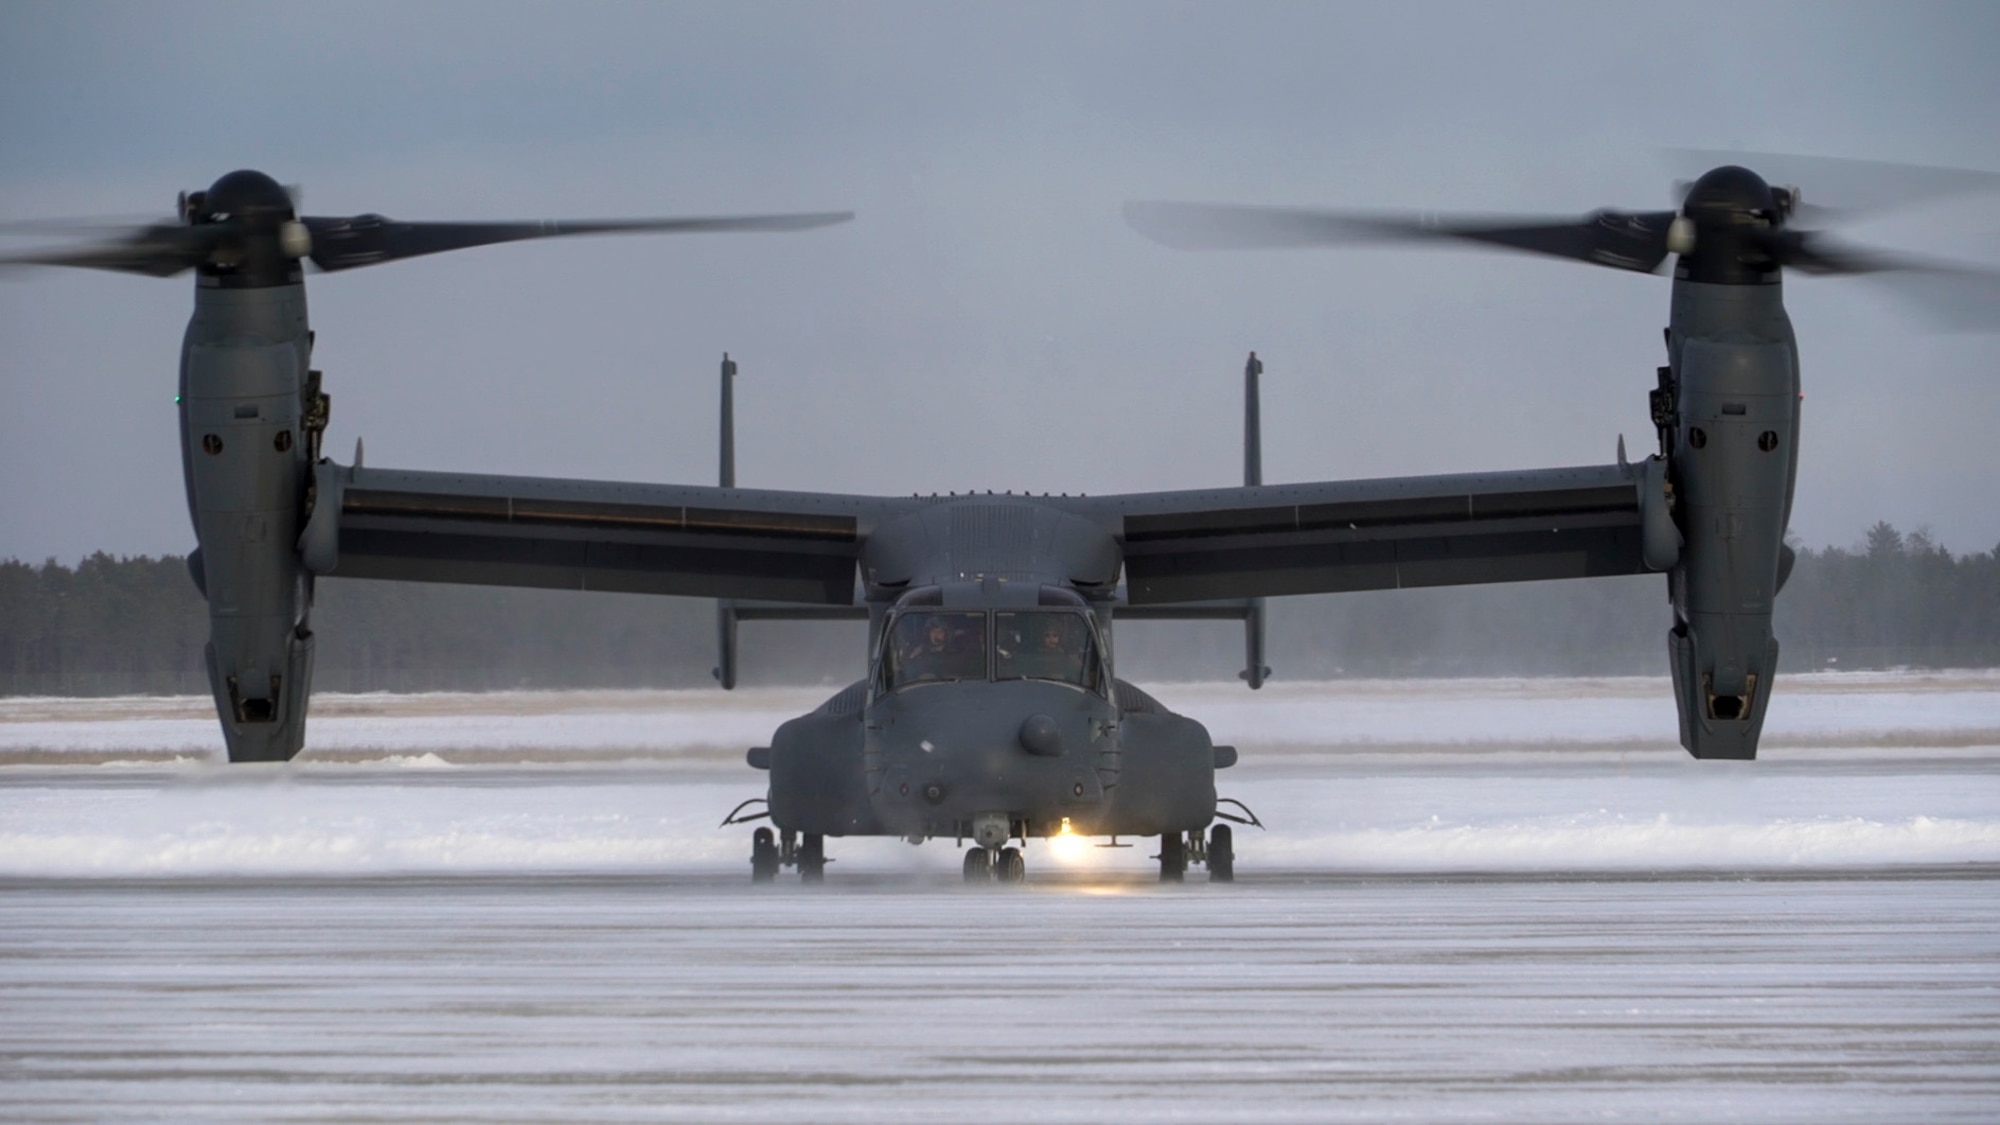 A U.S. Air Force CV-22 Osprey lands at Alpena Combat Readiness Training Center, Michigan, Jan. 21, 2020 during exercise Emerald Warrior. Emerald Warrior 20-1 provides annual, realistic pre-deployment training encompassing multiple joint operating areas to prepare special operations forces, conventional force enablers, partner nations, and interagency elements to integrate with, and execute full spectrum special operations in an arctic climate, sharpening U.S. forces' abilities to operate around the globe. (U.S. Air Force photo by Airman 1st Class Victoria Hadden)